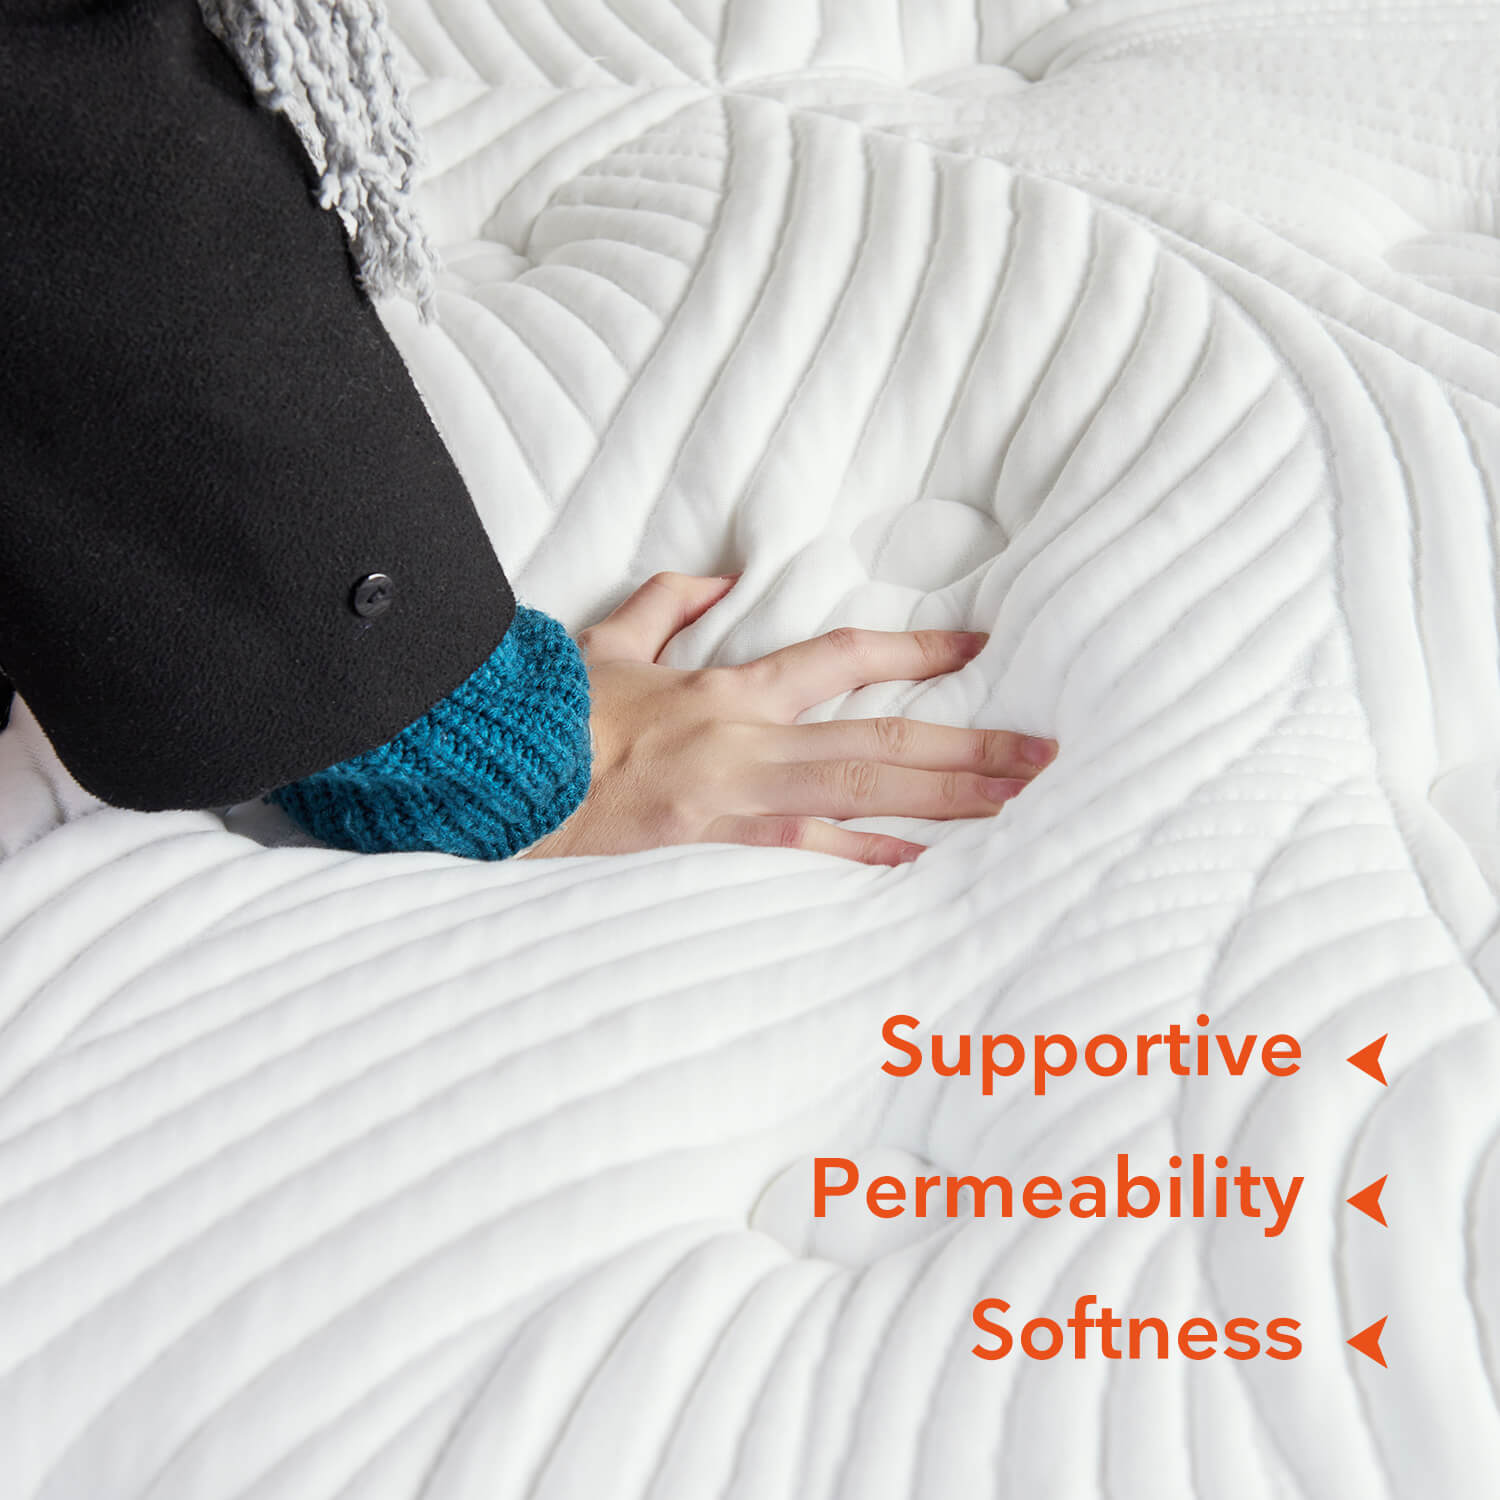 I gained new knowledge about using a combination of soft and firm mattresses to go to bed.